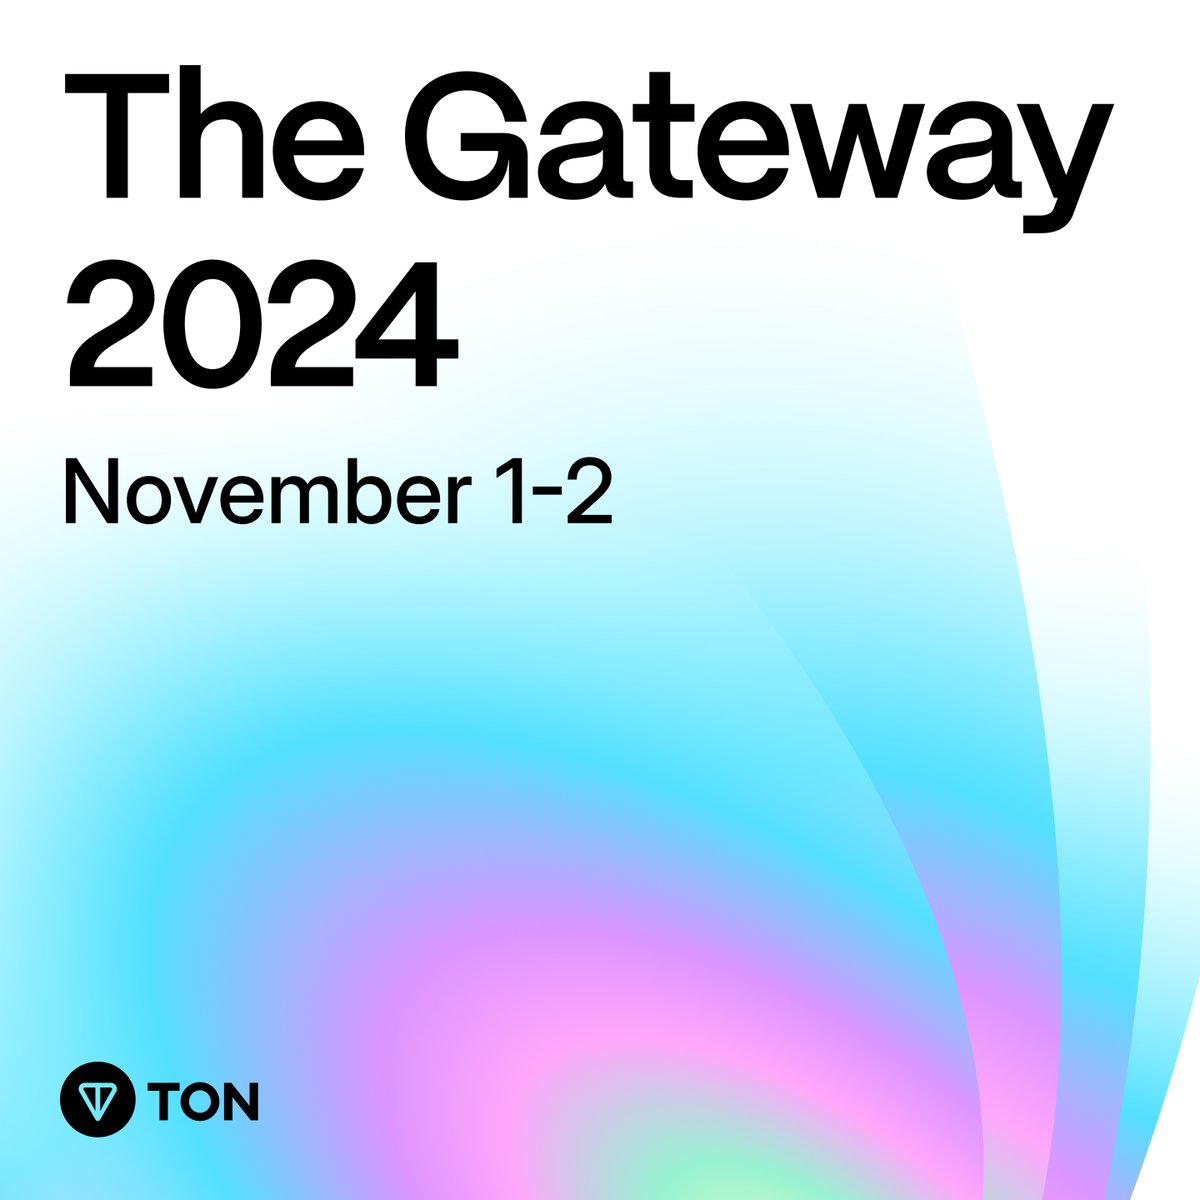 🔈 The Gateway, #TON's second annual live conference, will be hosted in Dubai on November 1-2, 2024! 📍🇦🇪

🎟️ Tickets go on sale in June. Stay tuned for more updates!